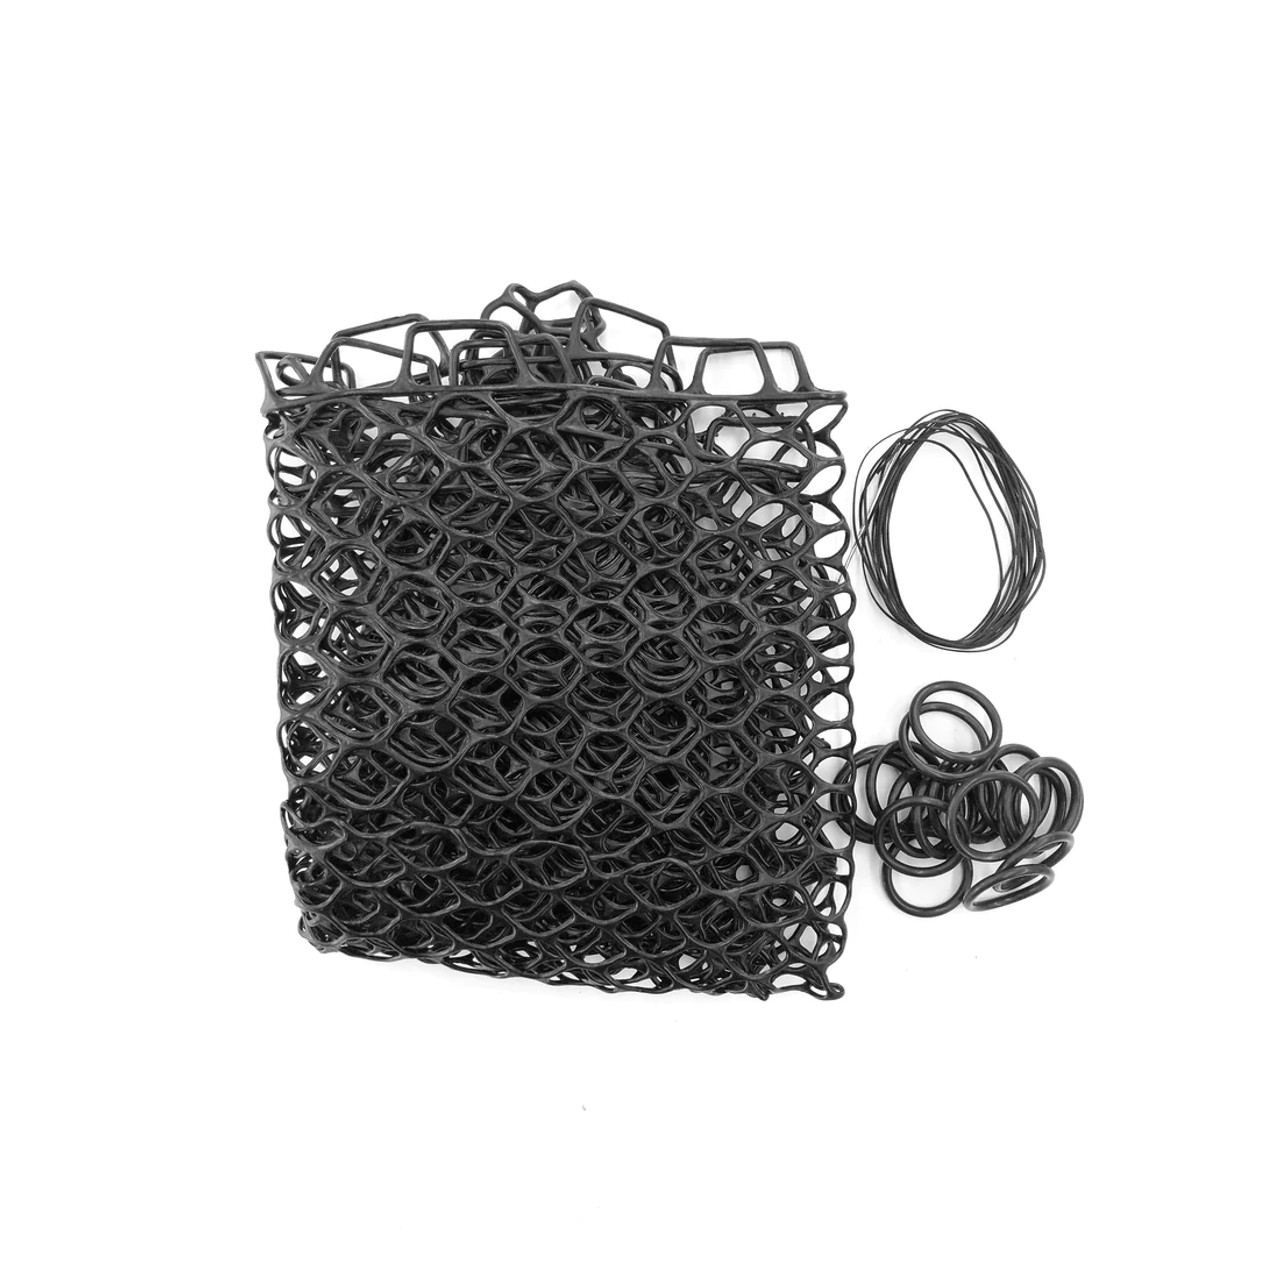 FISHPOND NOMAD REPLACEMENT RUBBER NET - 19"